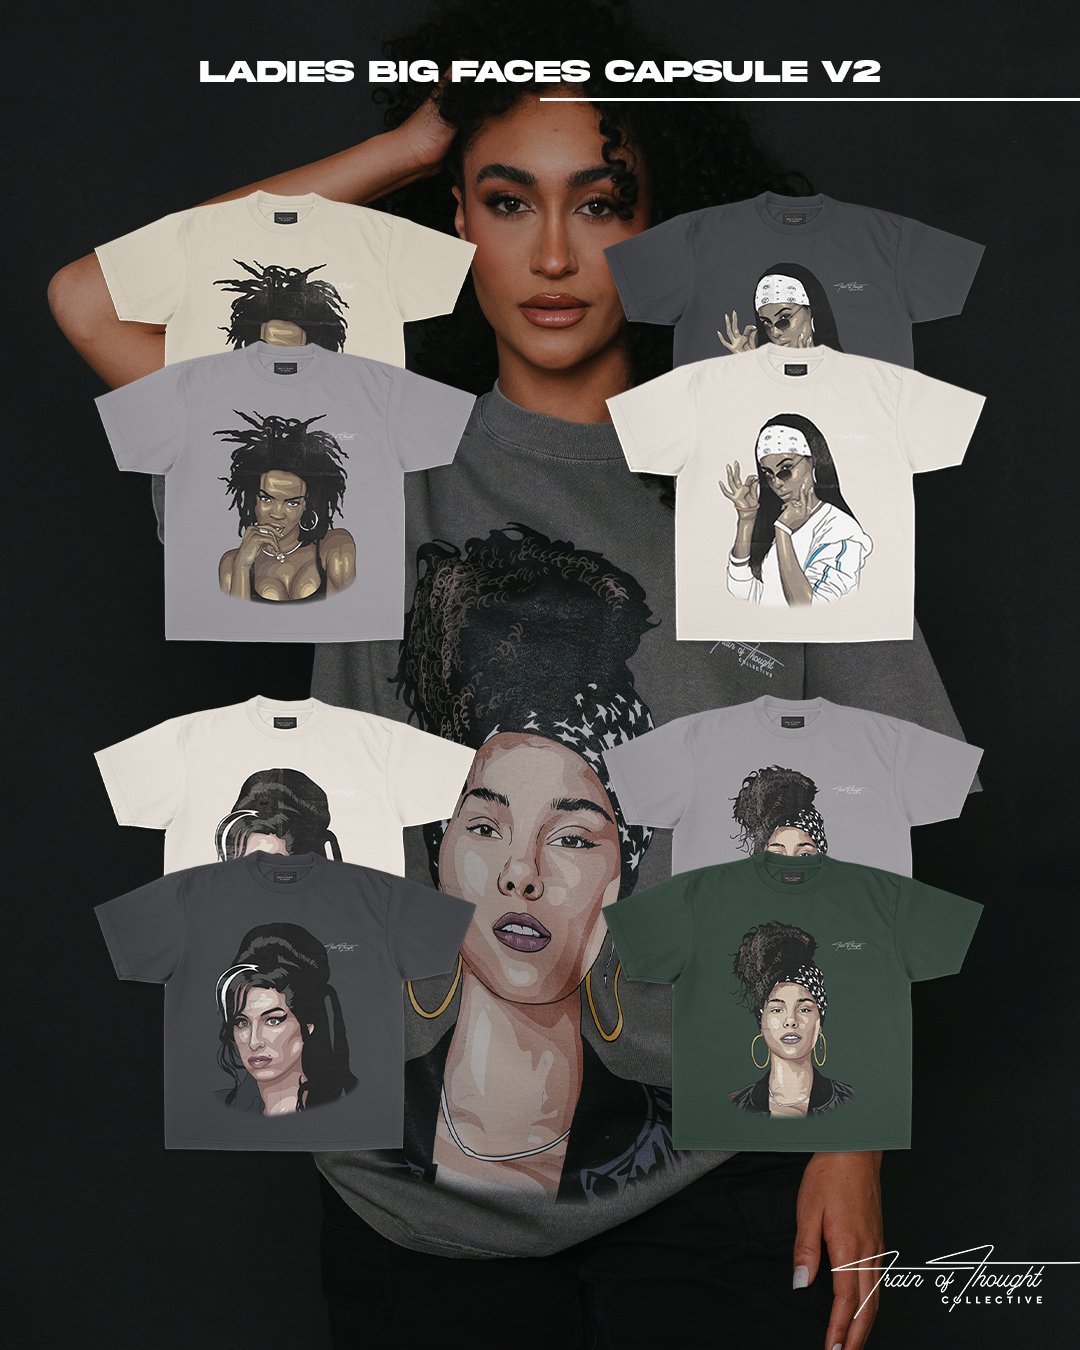 Ladies Big Faces Capsule V2 - trainofthoughtcollective